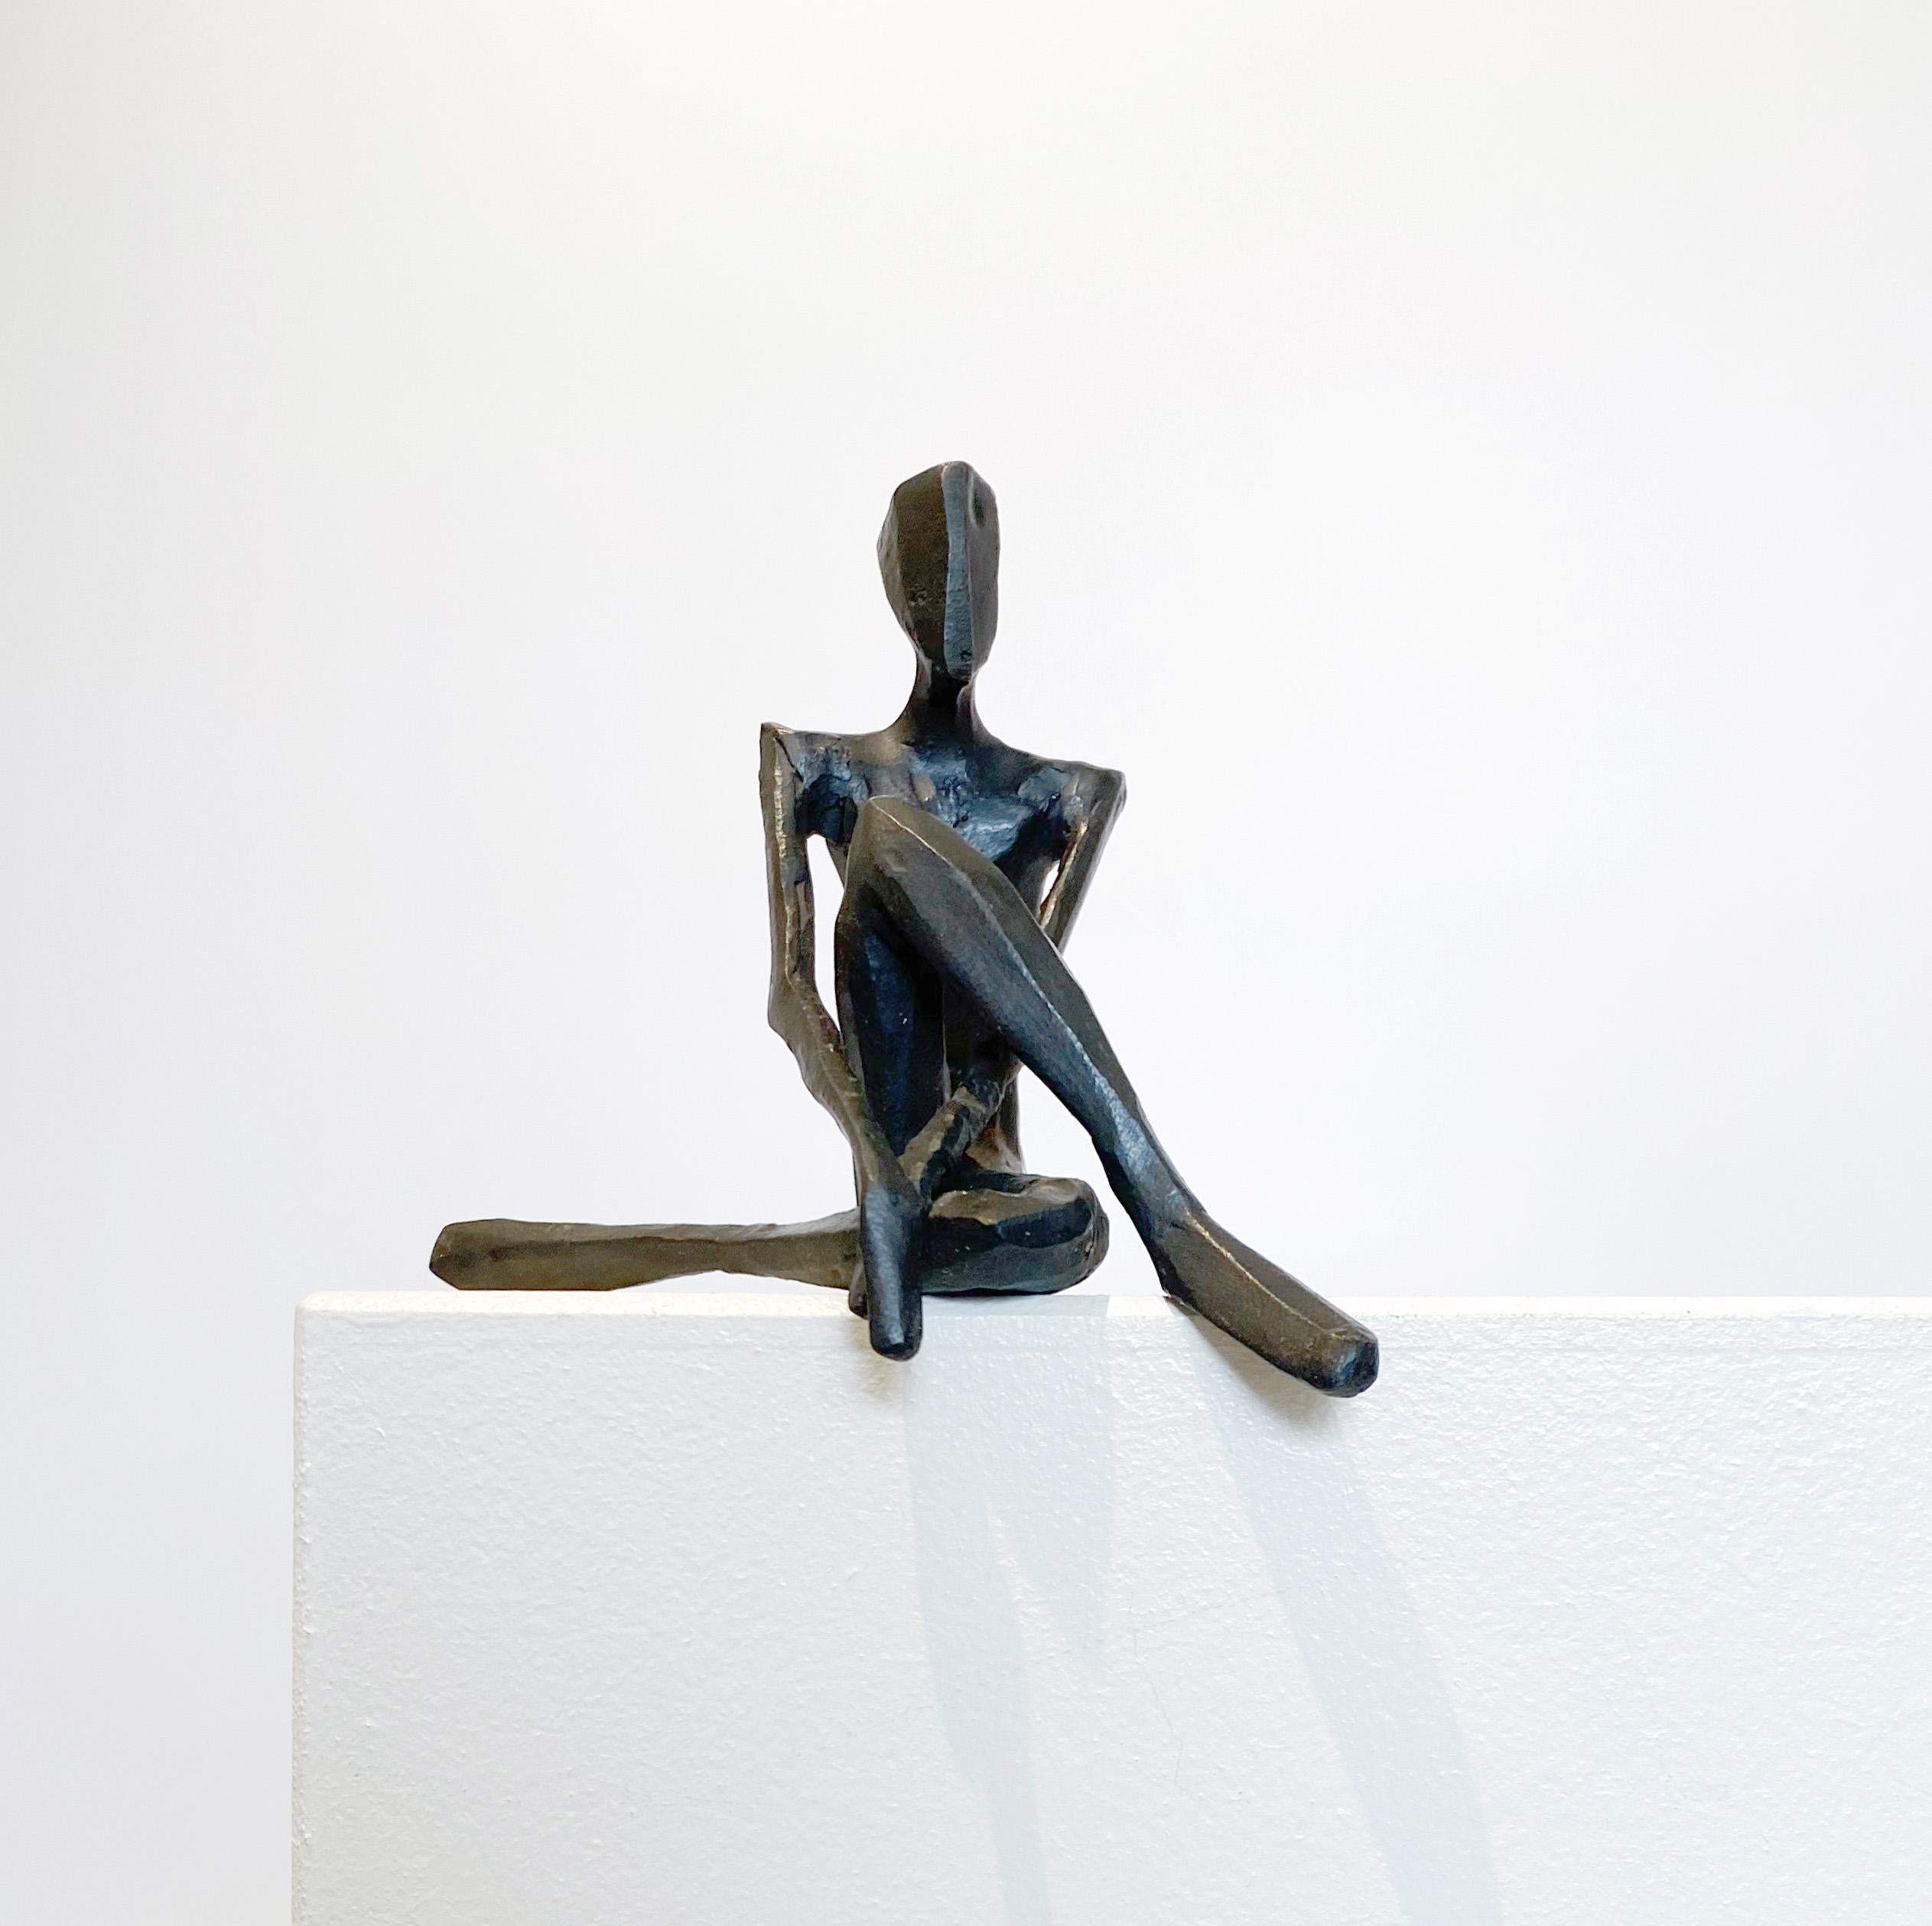 Olav is an elegant figurative bronze sculpture by Nando Kallweit.

Modelled on modern youthful postures but with a nod to the importance of heritage through the stylised Egyptian-influenced head. A lovely piece on its own or with a group of